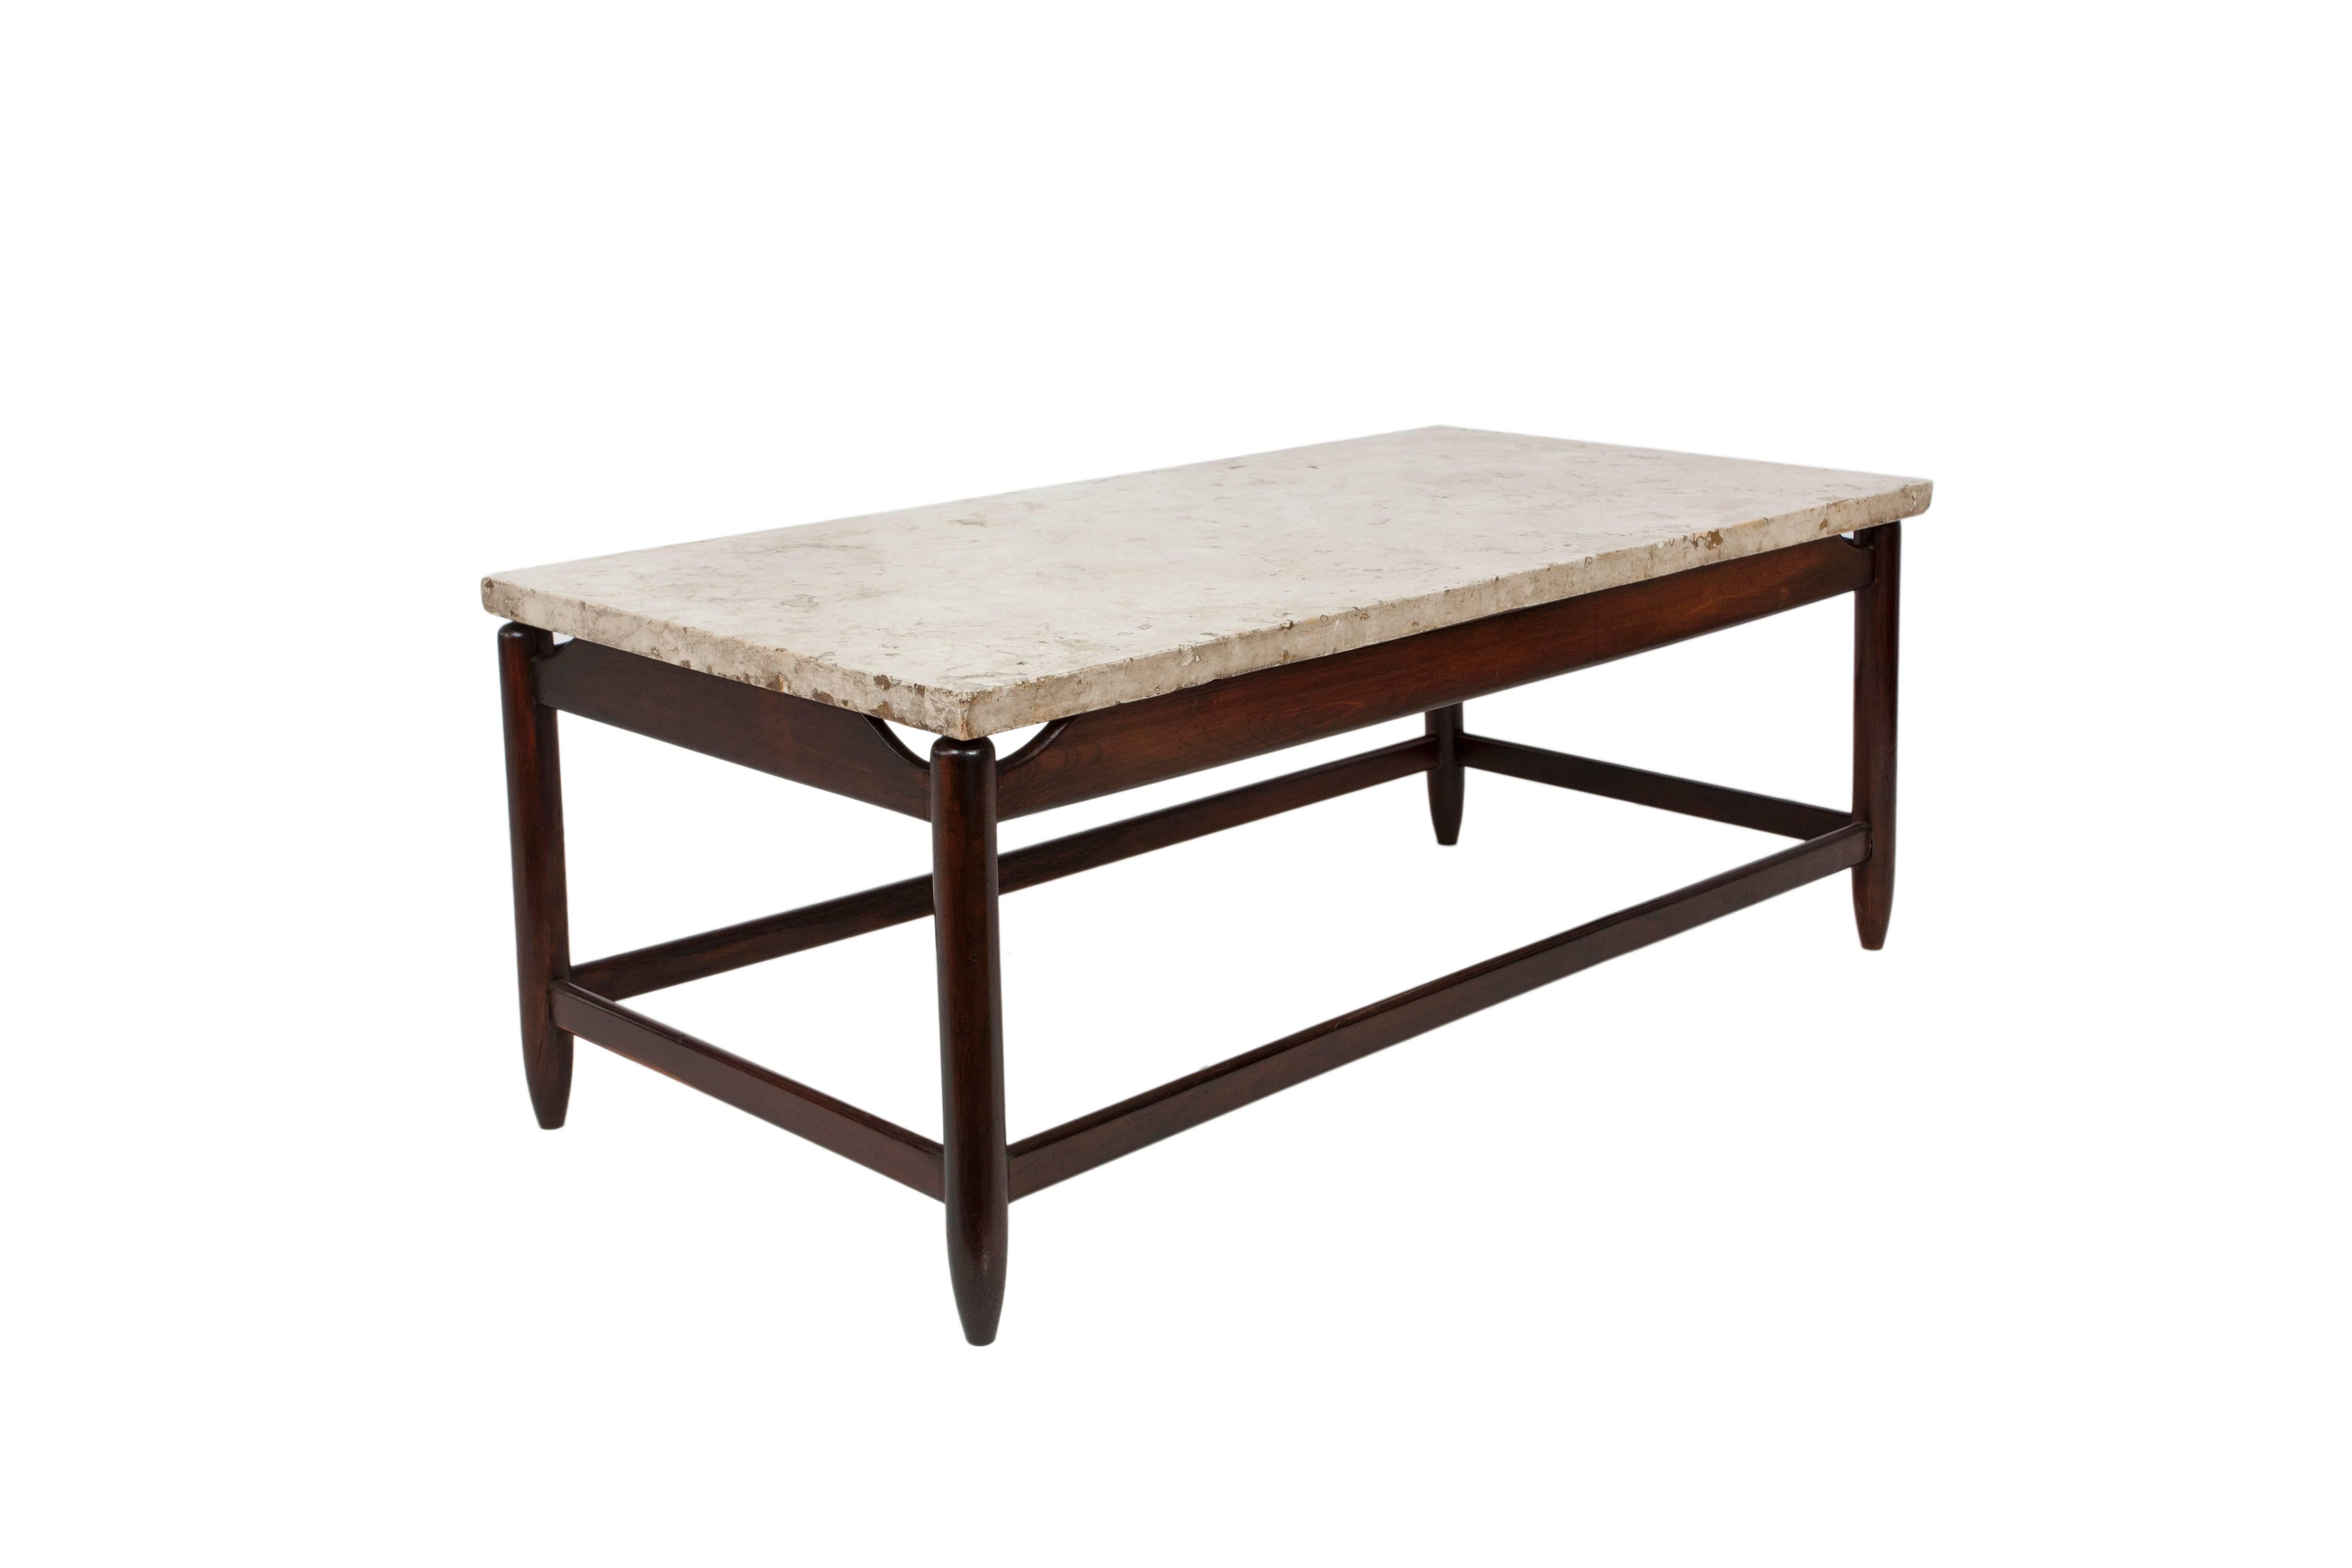 A Brazilian modern coffee table, produced, circa 1960s by Brazilian architect and designer Sergio Rodrigues, marble top on wood base, with stretcher poles and tapered legs. Excellent vintage condition, consistent with age and use.